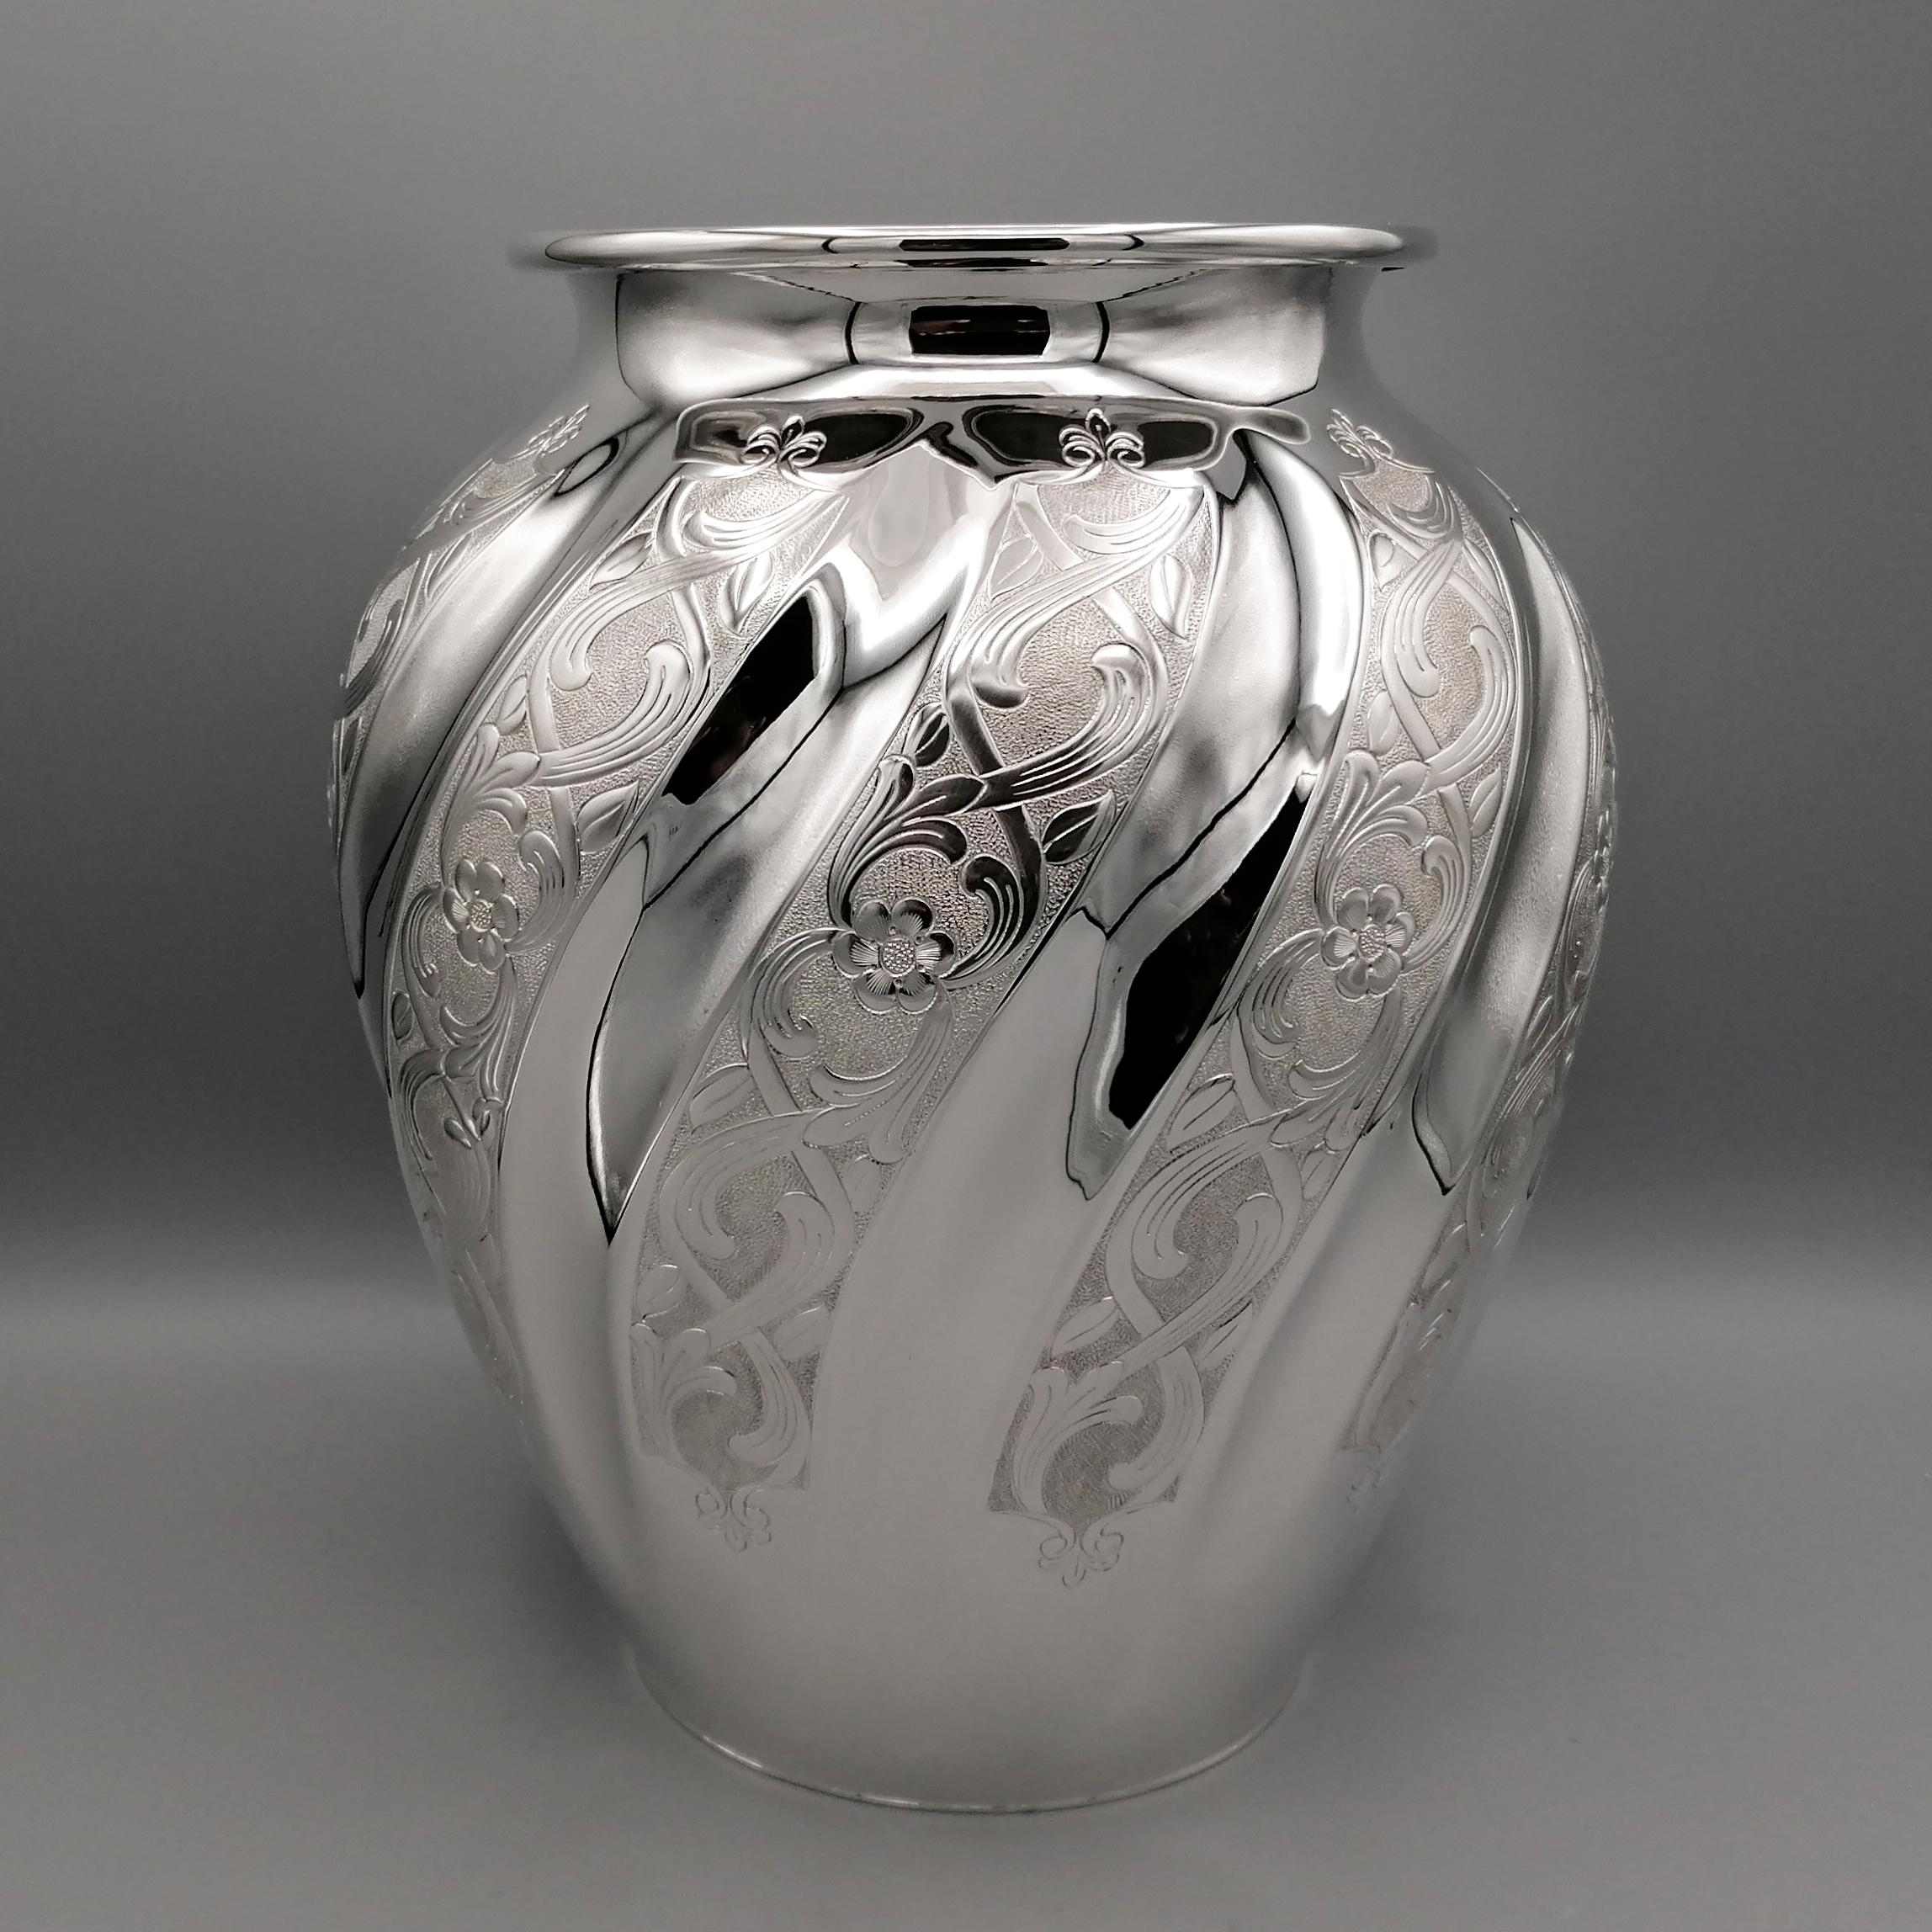 925 Sterling silver vase.
The round pot-bellied vase was made entirely by hand and subsequently embossed with a torchon motif.
The concave grooves have been left polished while the convex ones have been hand engraved with flowers and scrolls. To